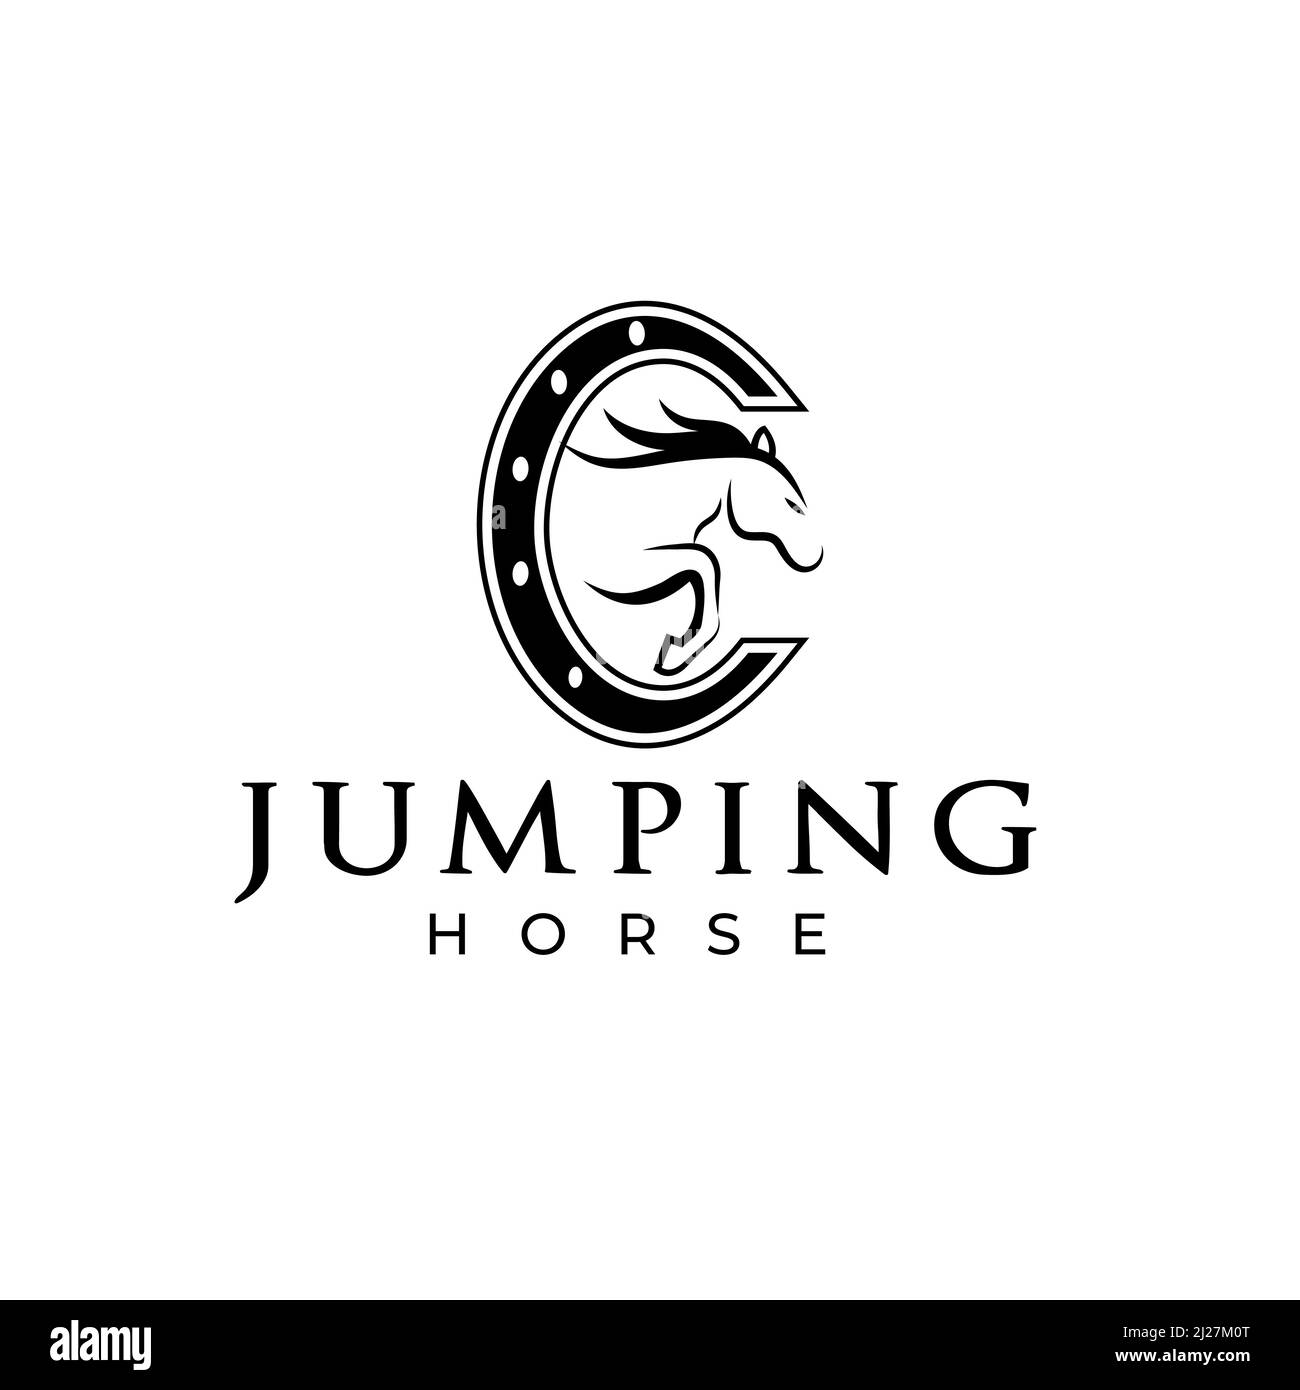 Jumping horse logo. Horse Event. Show Jumping Competition. Sport. Icons and design elements. Initial letter C. Monogram. Types of typographic logos. V Stock Vector